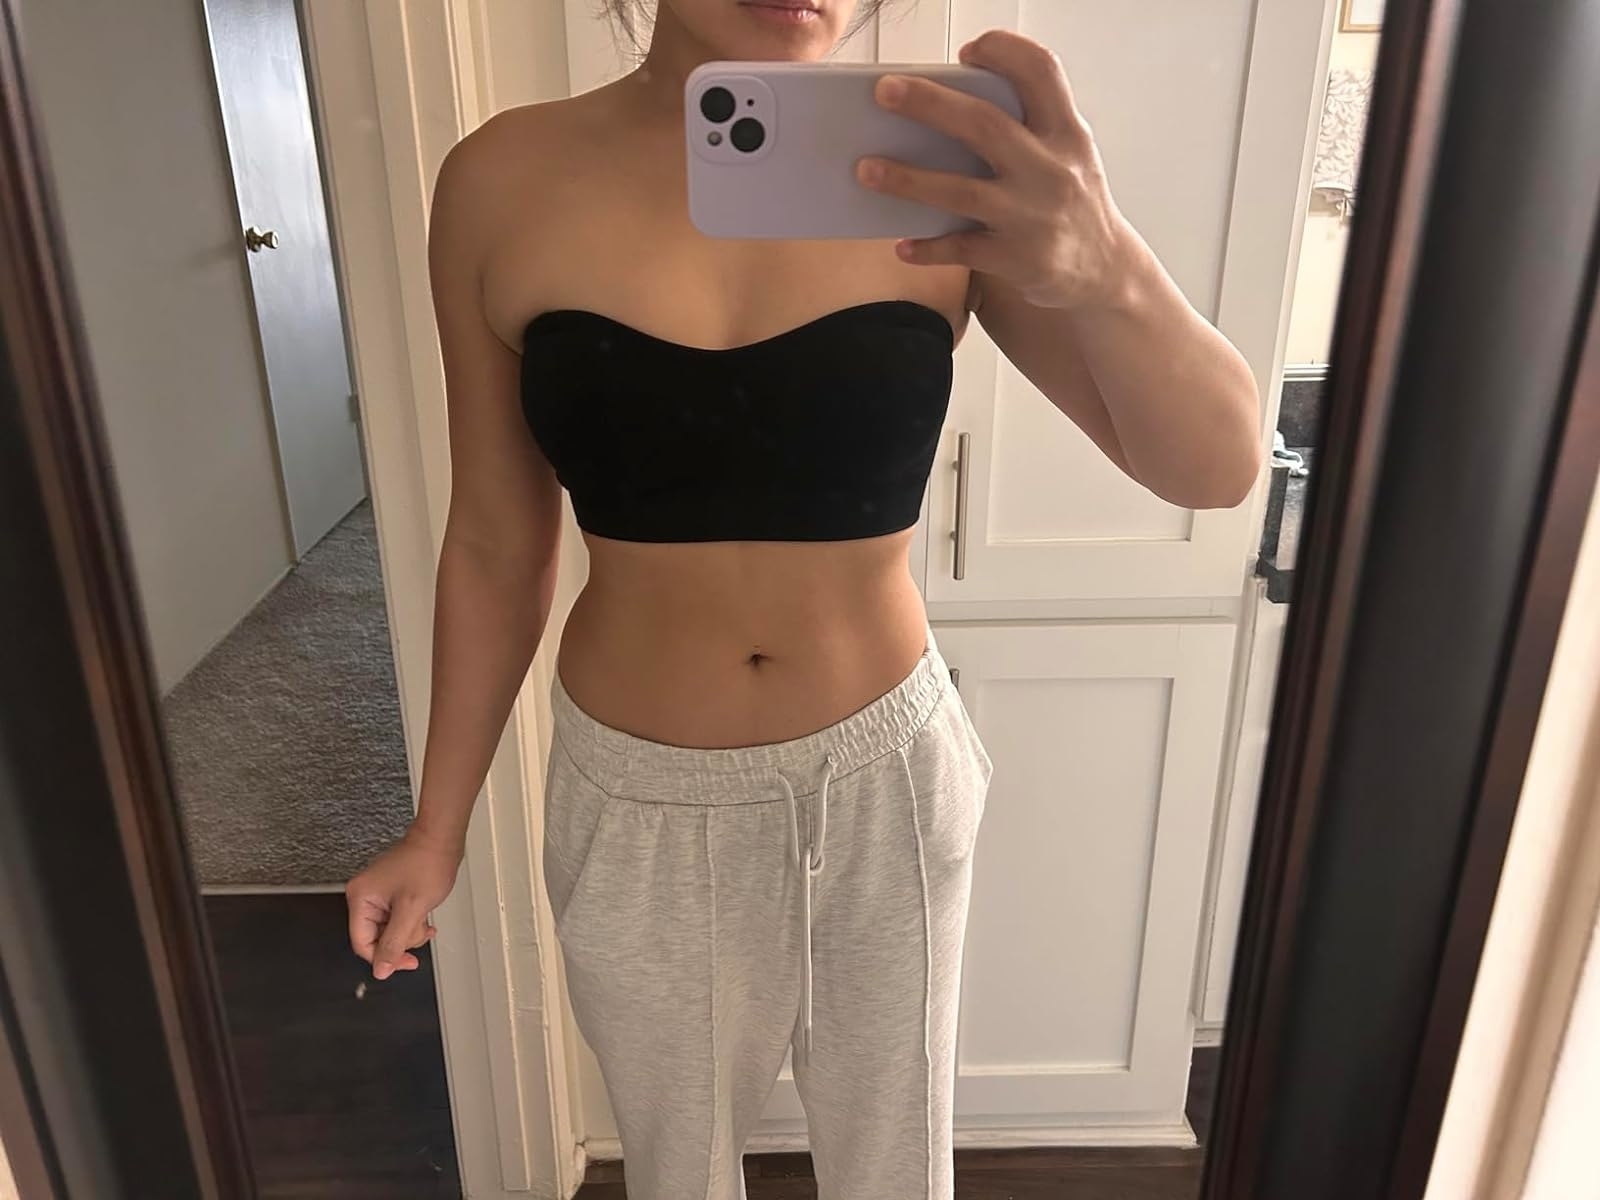 Person wearing a black strapless top and light-colored sweatpants takes a mirror selfie in a modern home